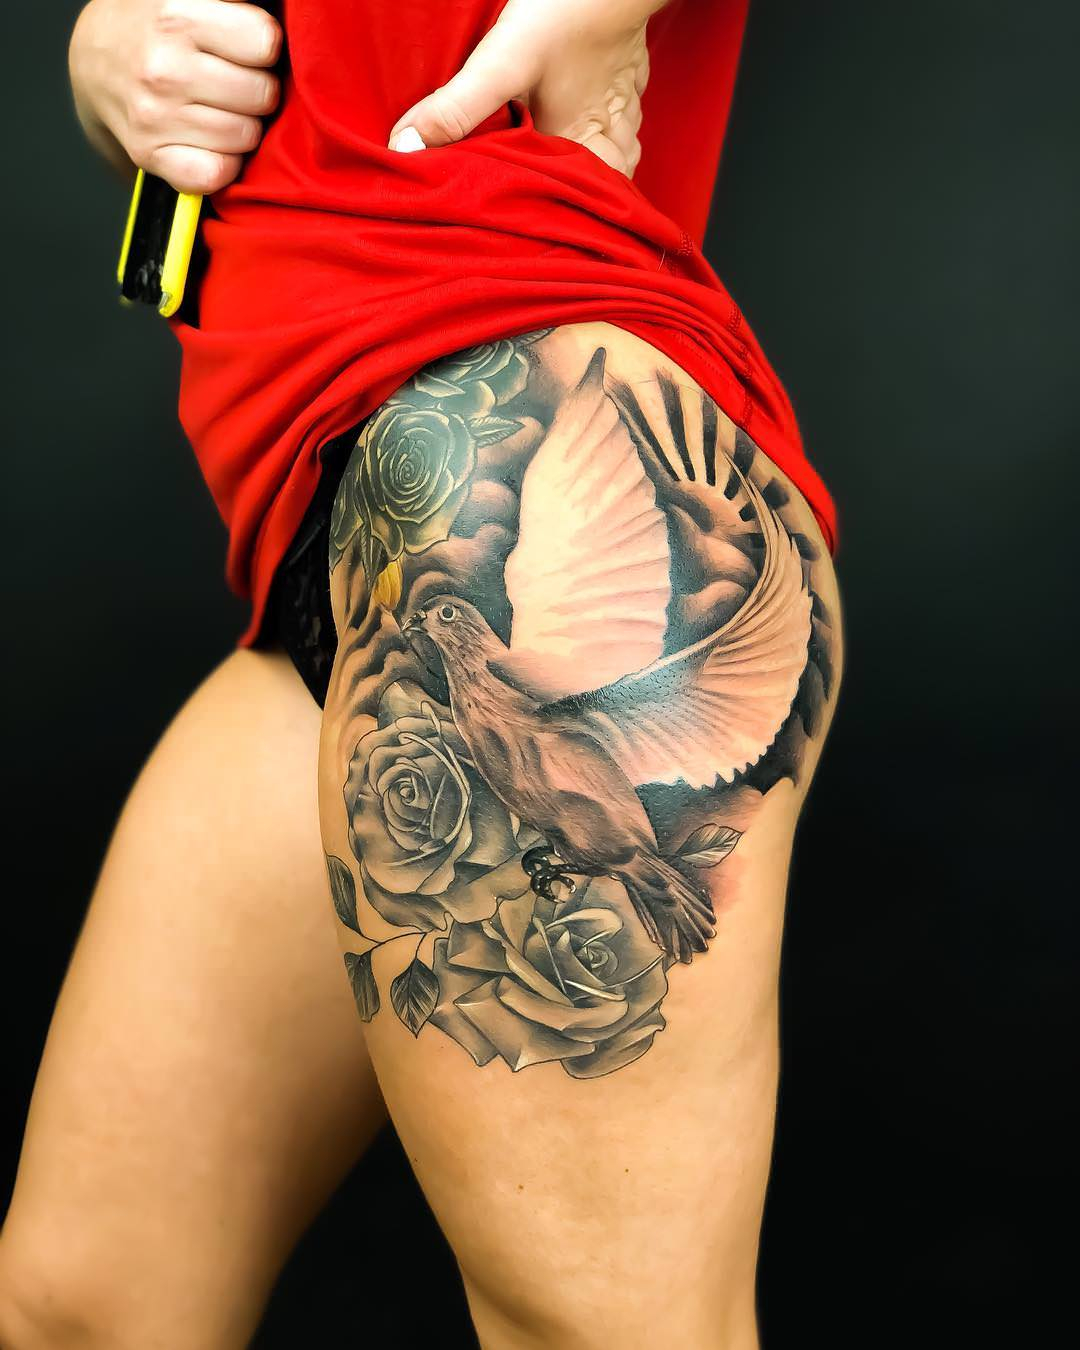 155 Side Tattoos That Make You Look Sexier Prochronism in measurements 1080 X 1350